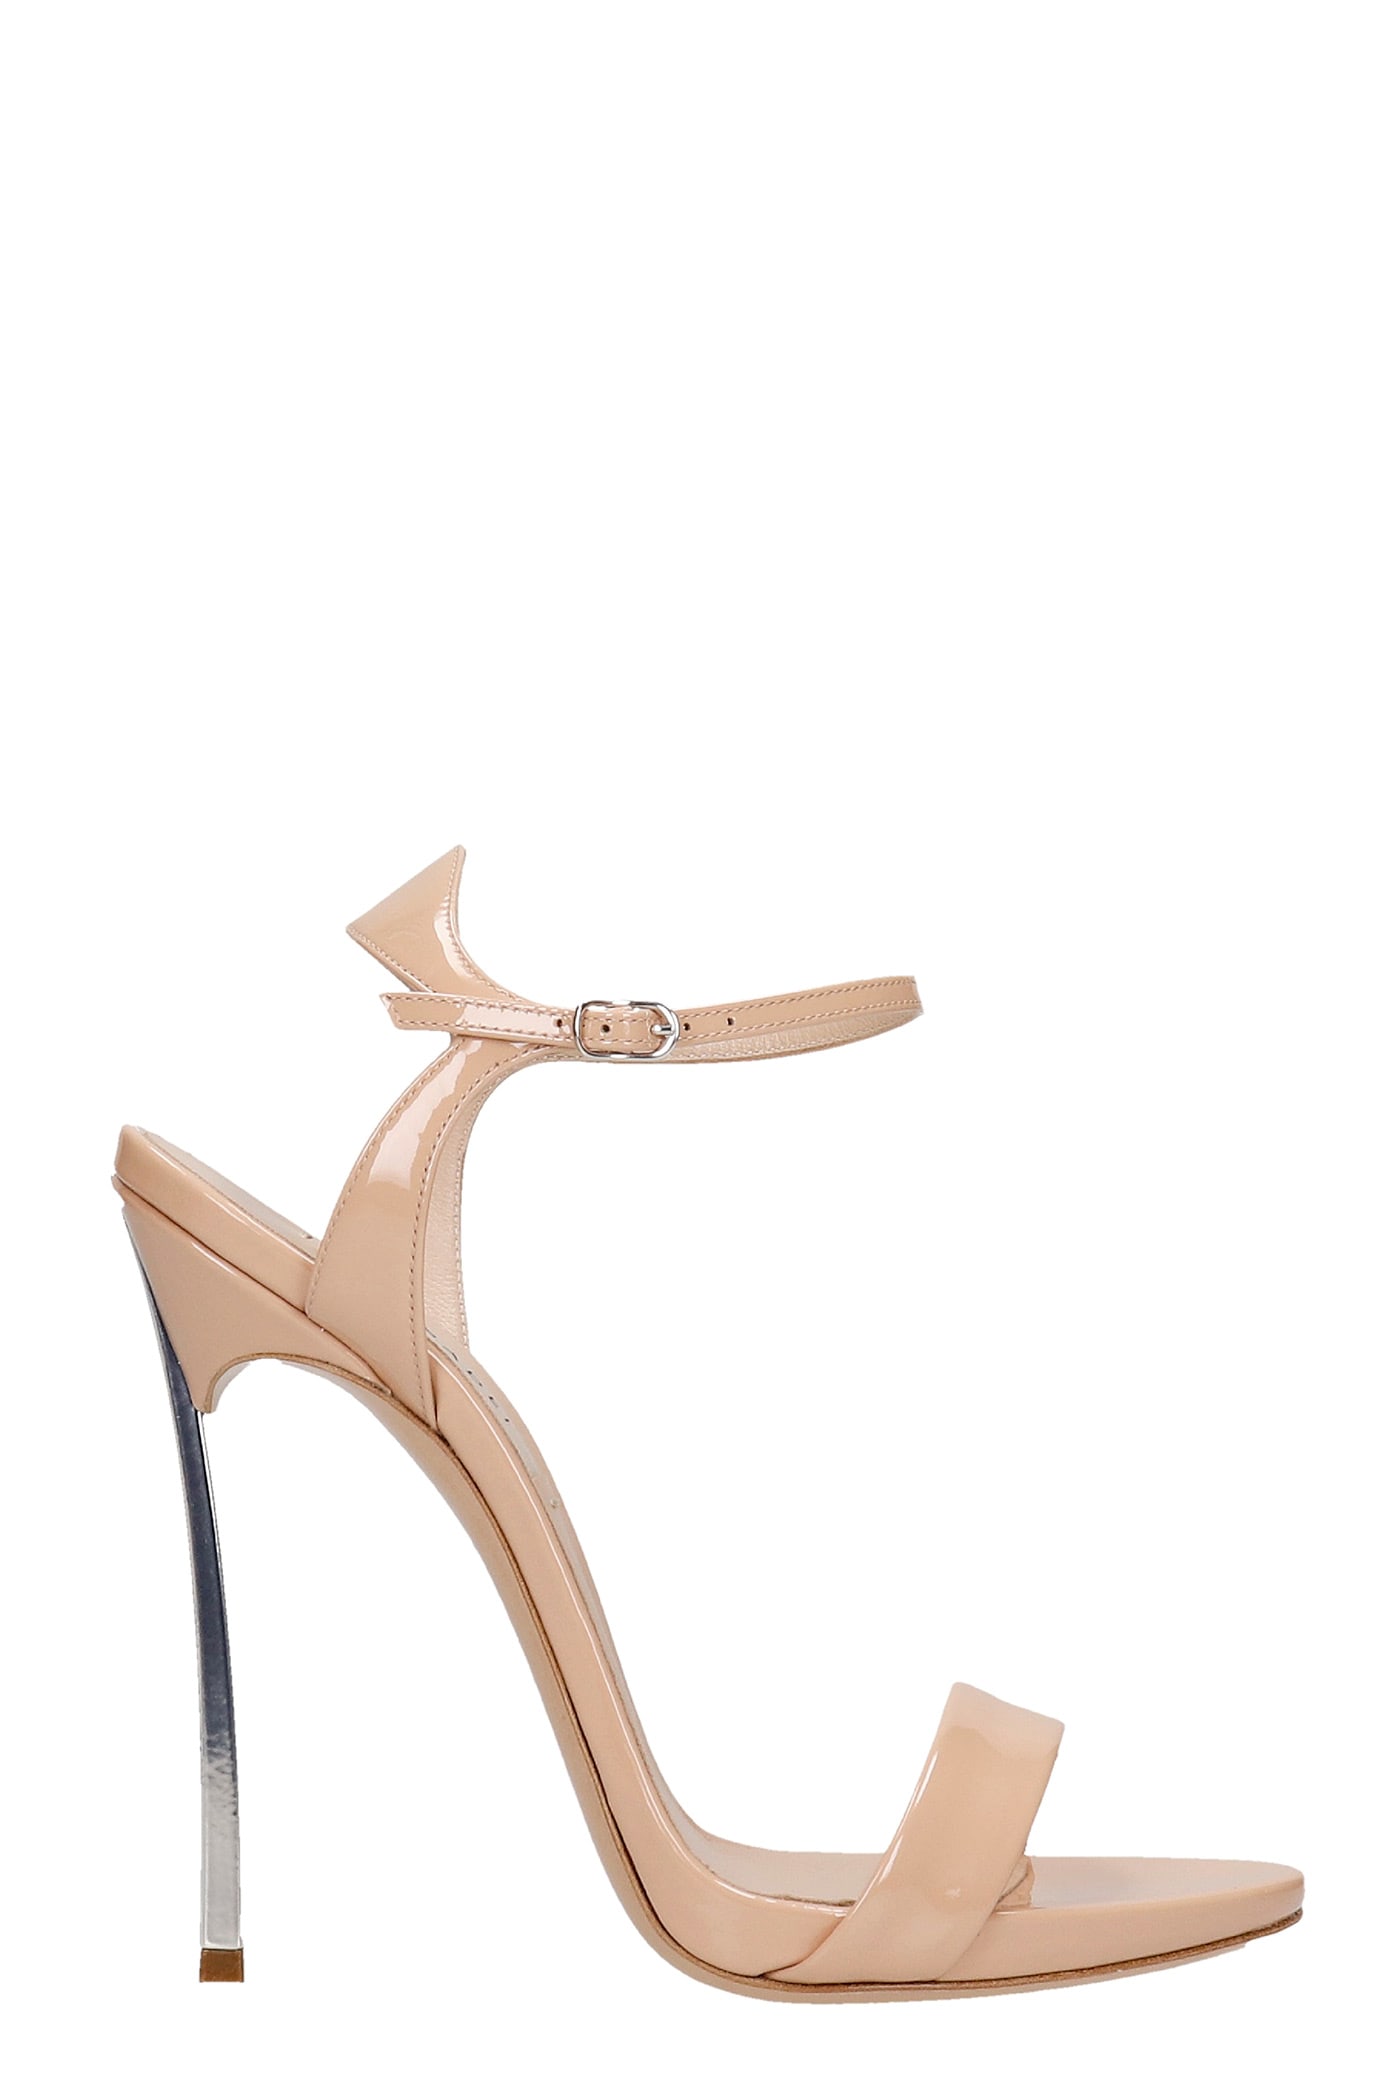 Casadei Sandals In Powder Patent Leather